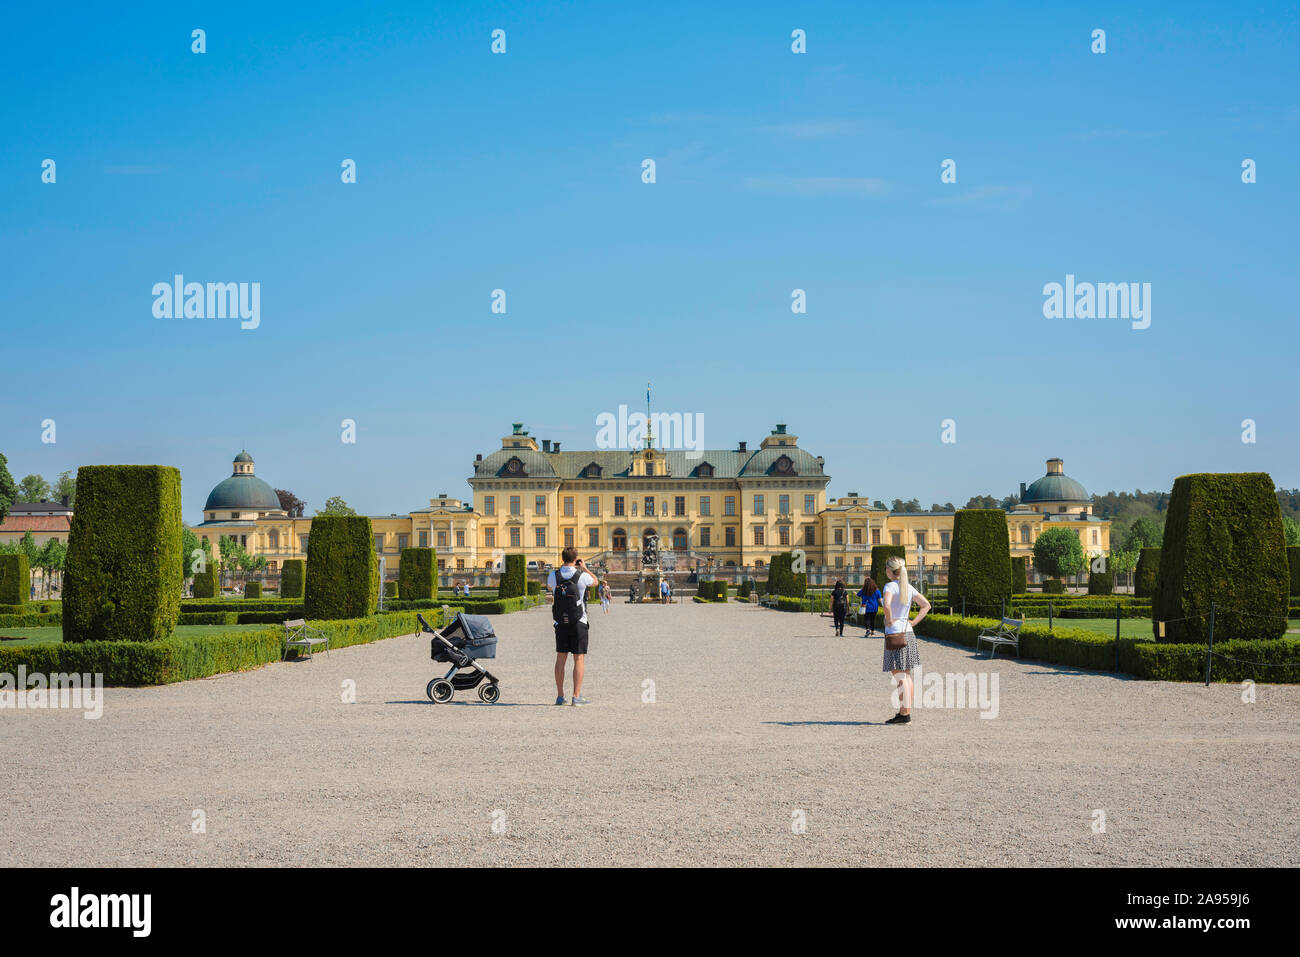 Young family holiday, view in summer of young parents standing in the Baroque garden at Drottningholm and looking back at the palace building, Sweden. Stock Photo